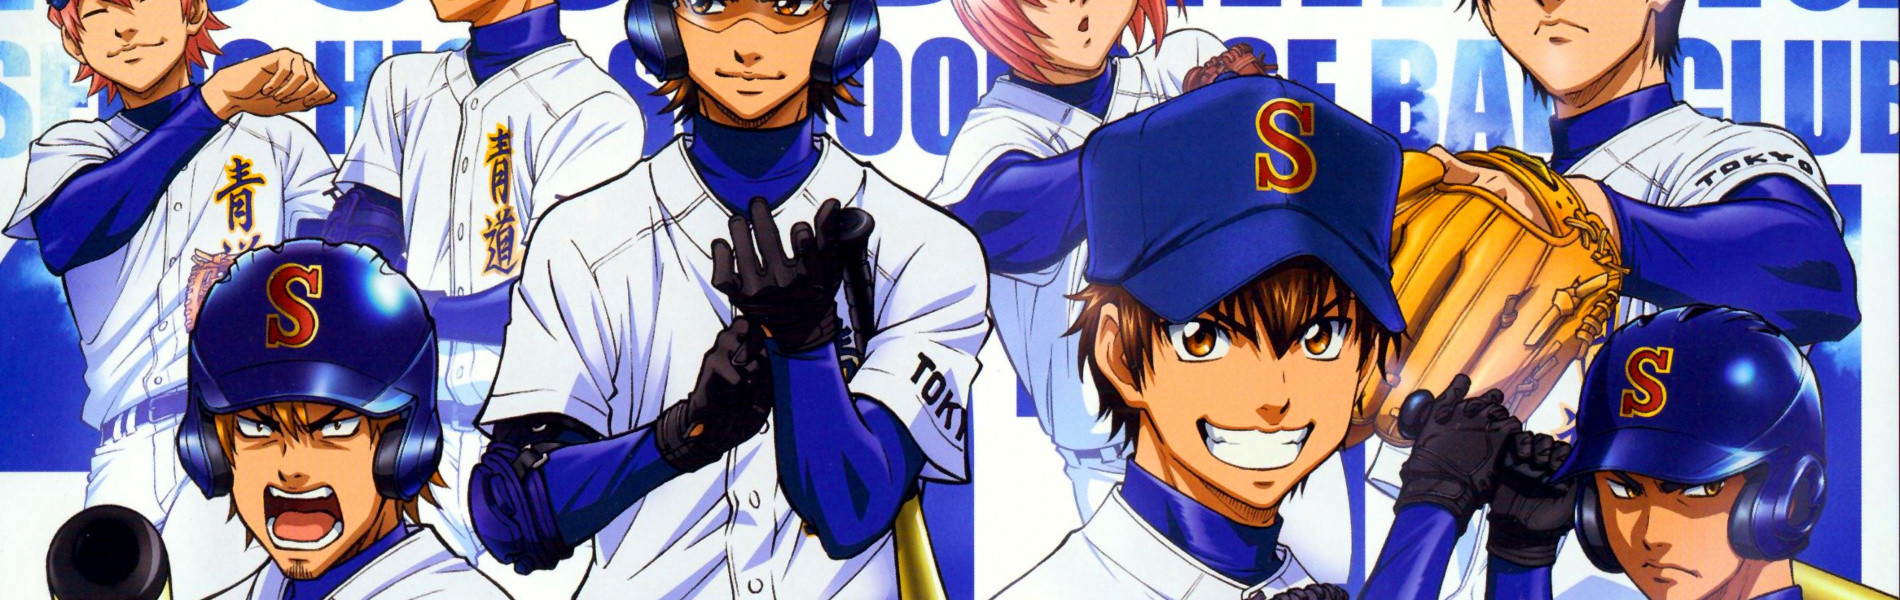 Banner for Ace of the Diamond